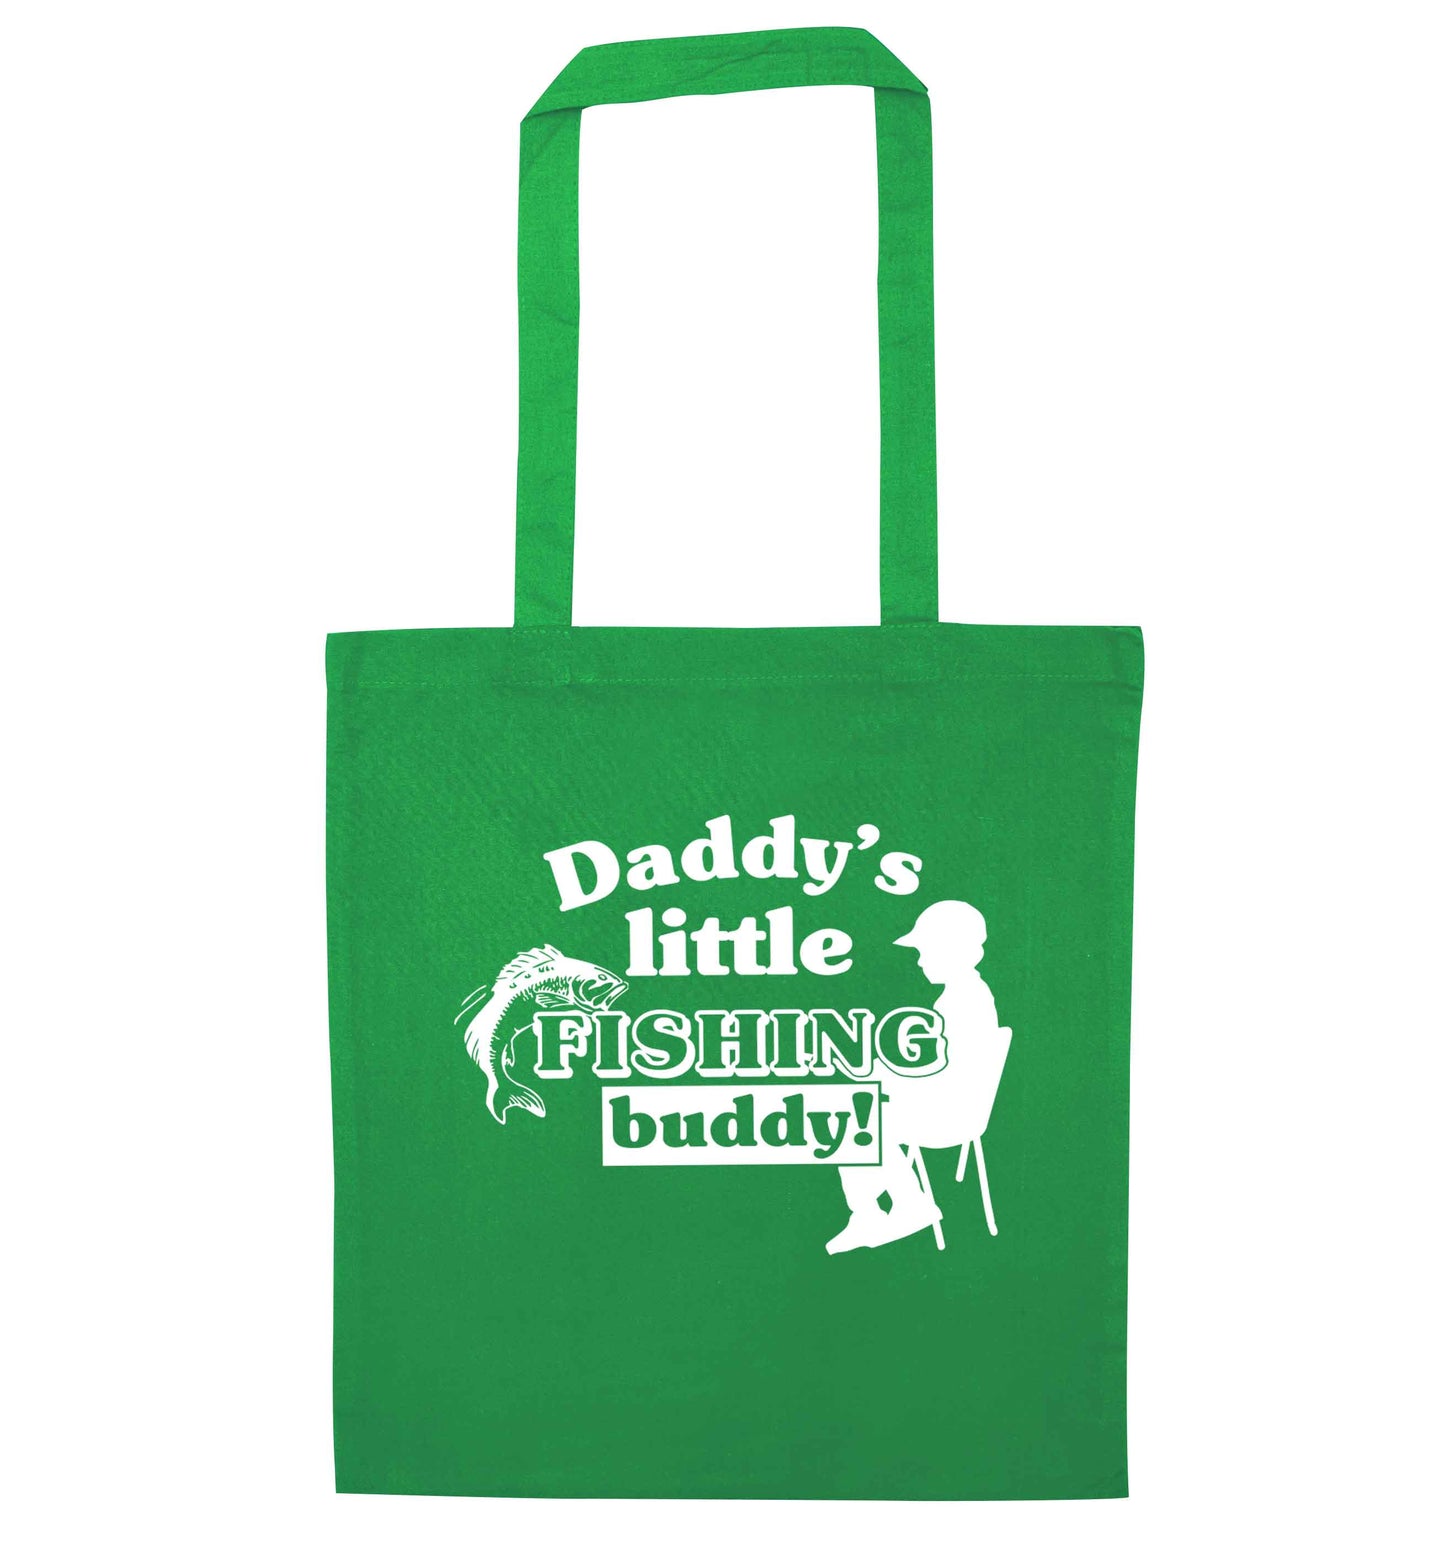 Daddy's little fishing buddy green tote bag